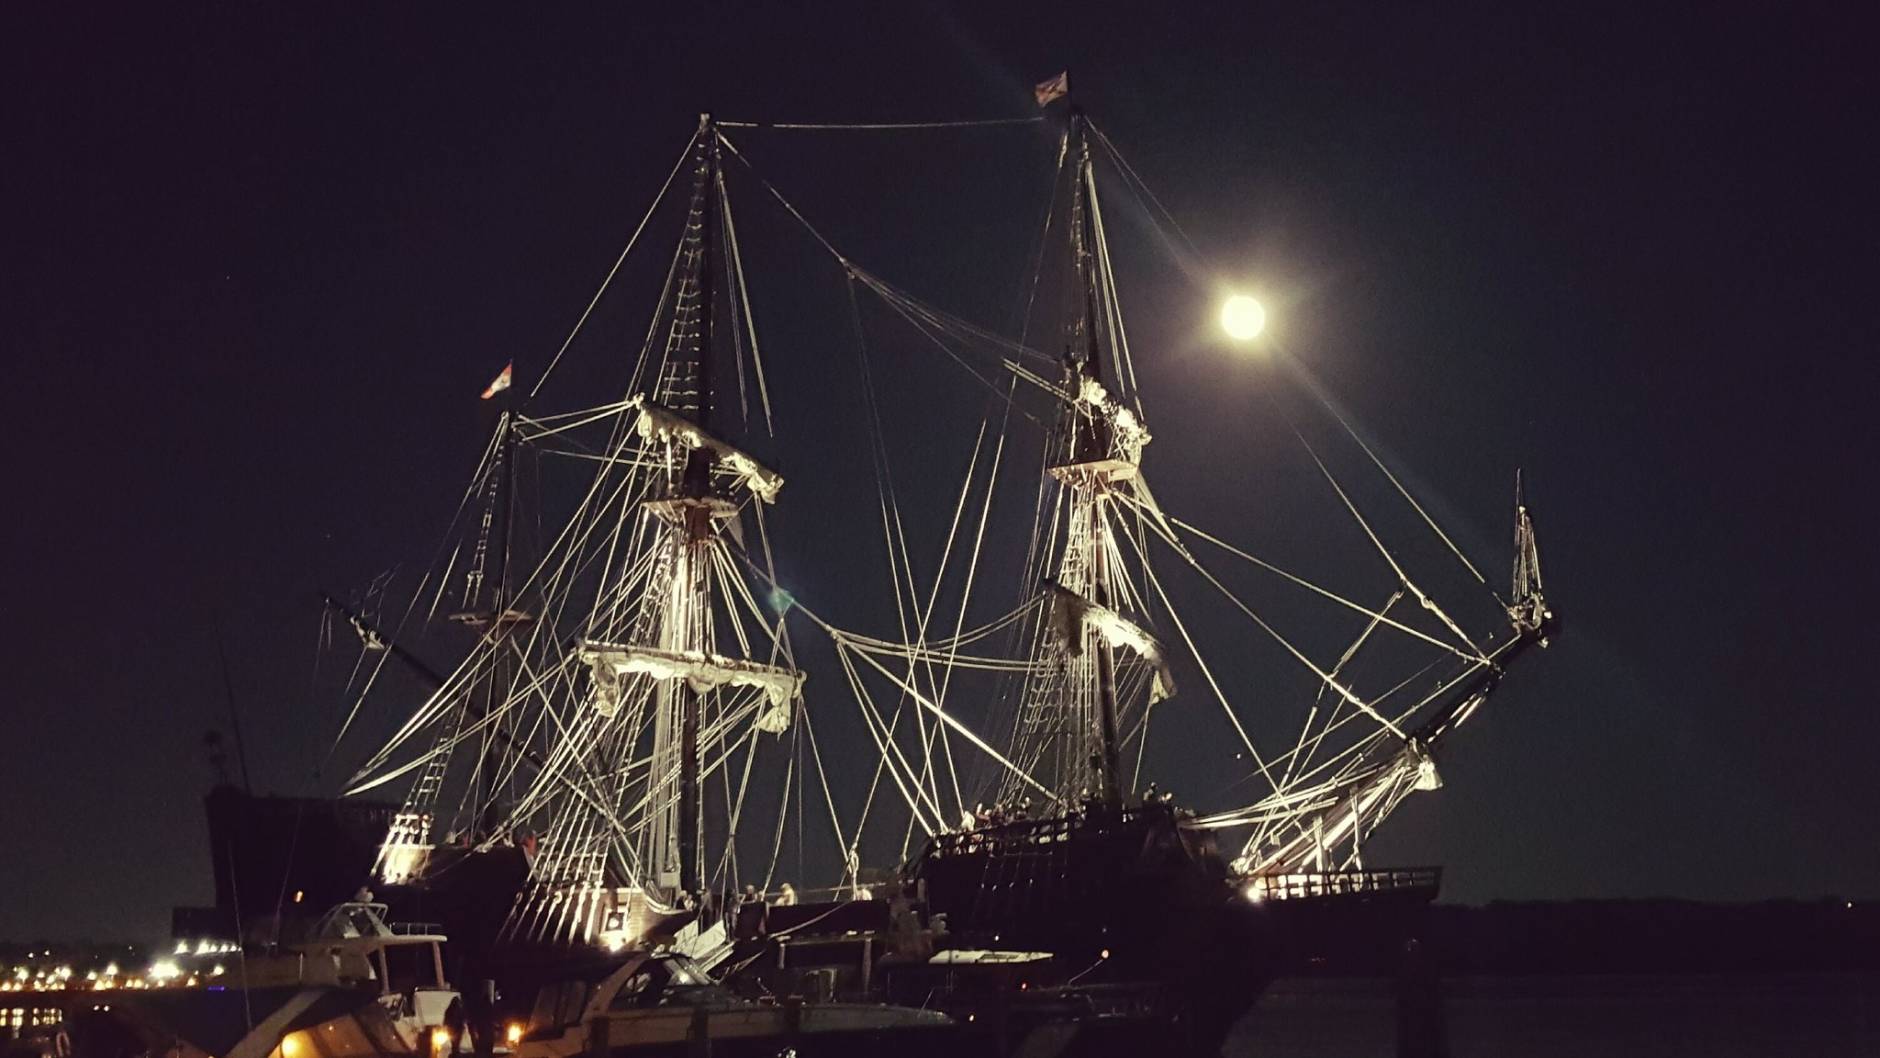 The supermoon shines through the rigging of the Spanish galleon docked in Old Town Alexandria. (Courtesy Steve Skemp)